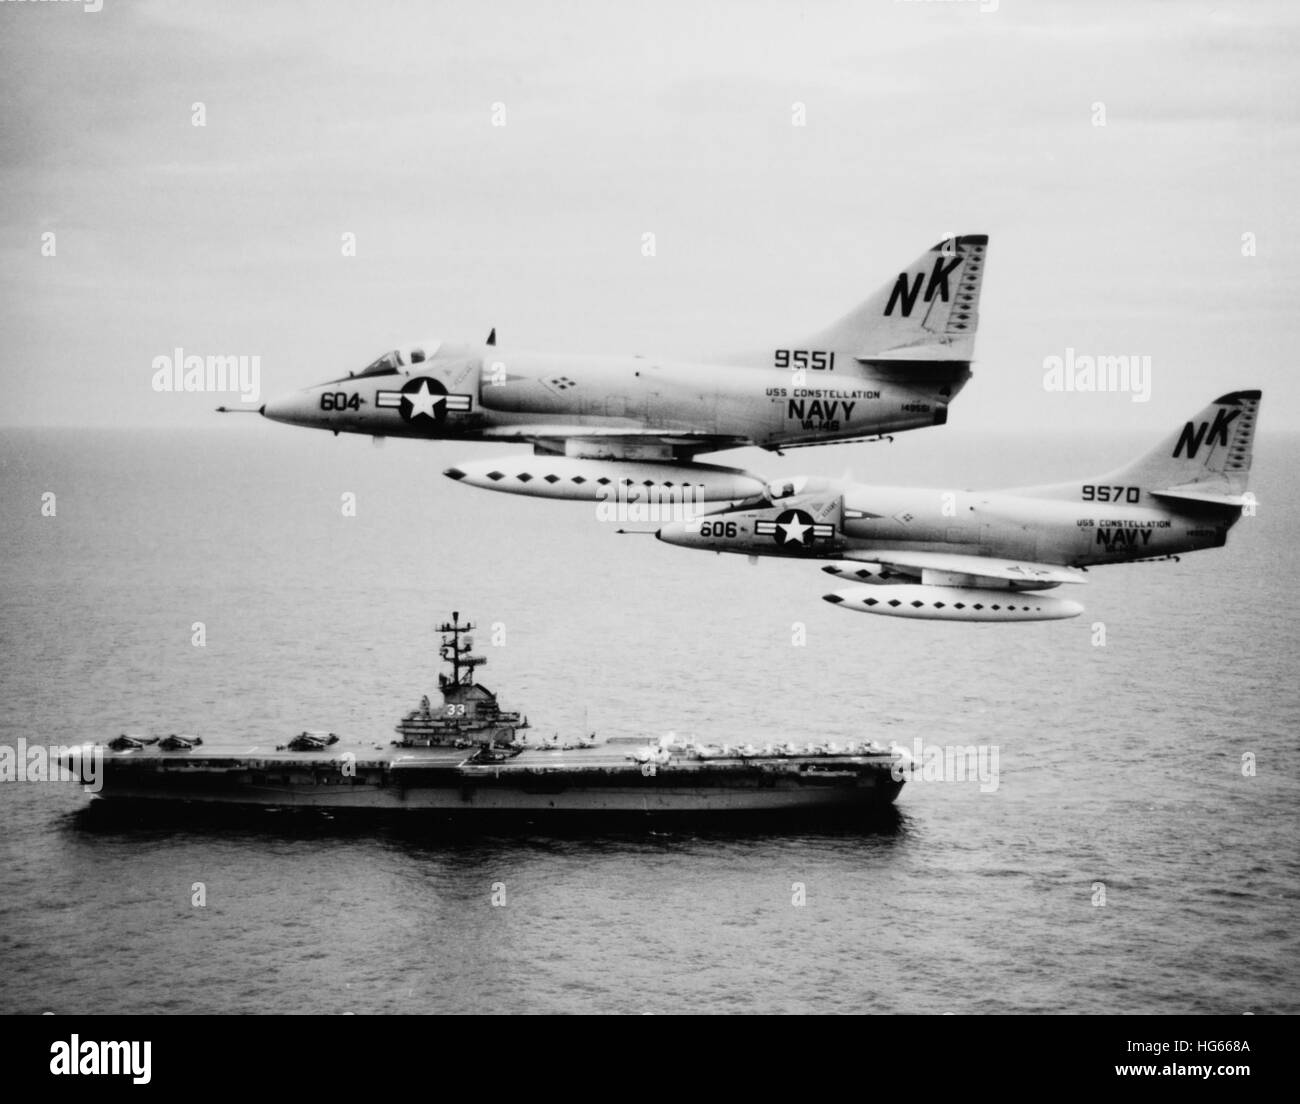 Two A-4C Skyhawk aircraft fly past anti-submarine aircraft carrier USS Kearsarge, 1964 Stock Photo